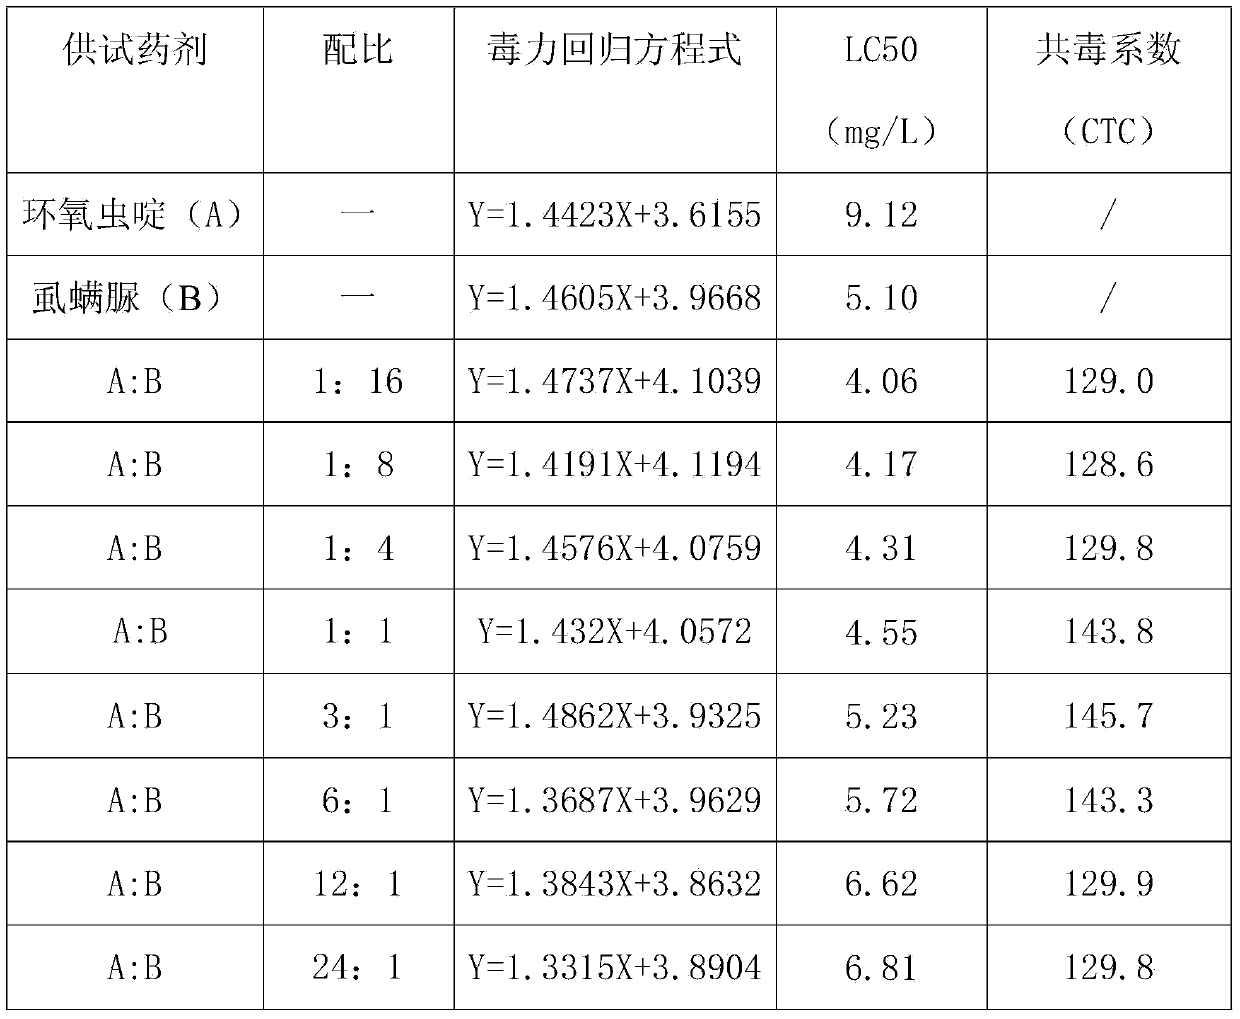 Ultra-low volume liquid containing cycloxaprid and insect growth regulator pesticide